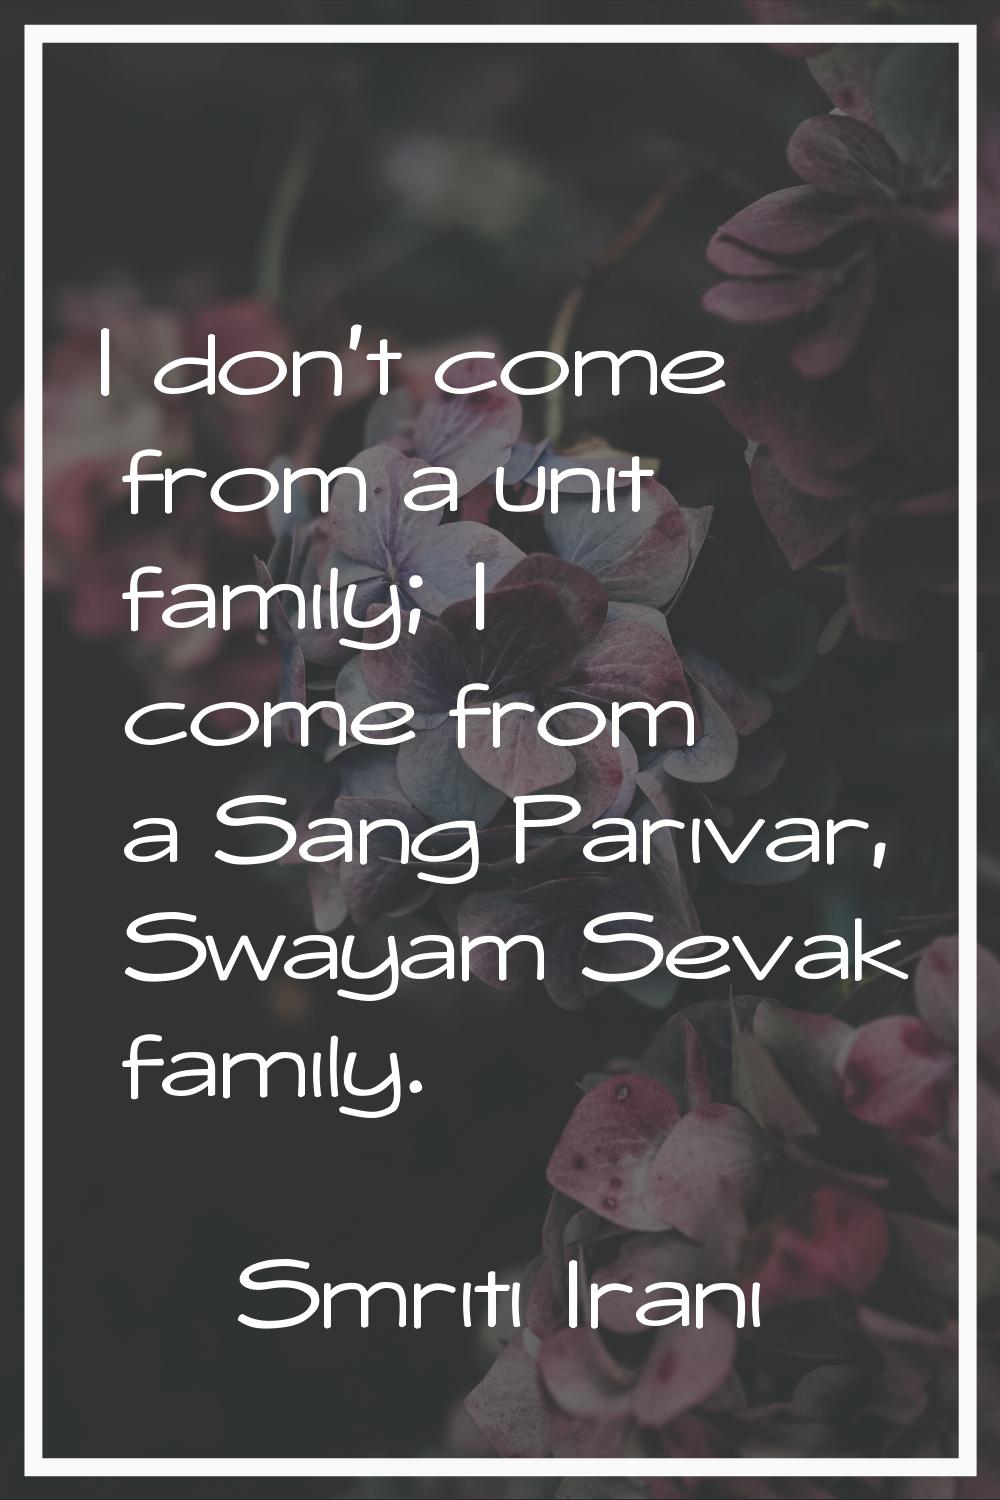 I don't come from a unit family; I come from a Sang Parivar, Swayam Sevak family.